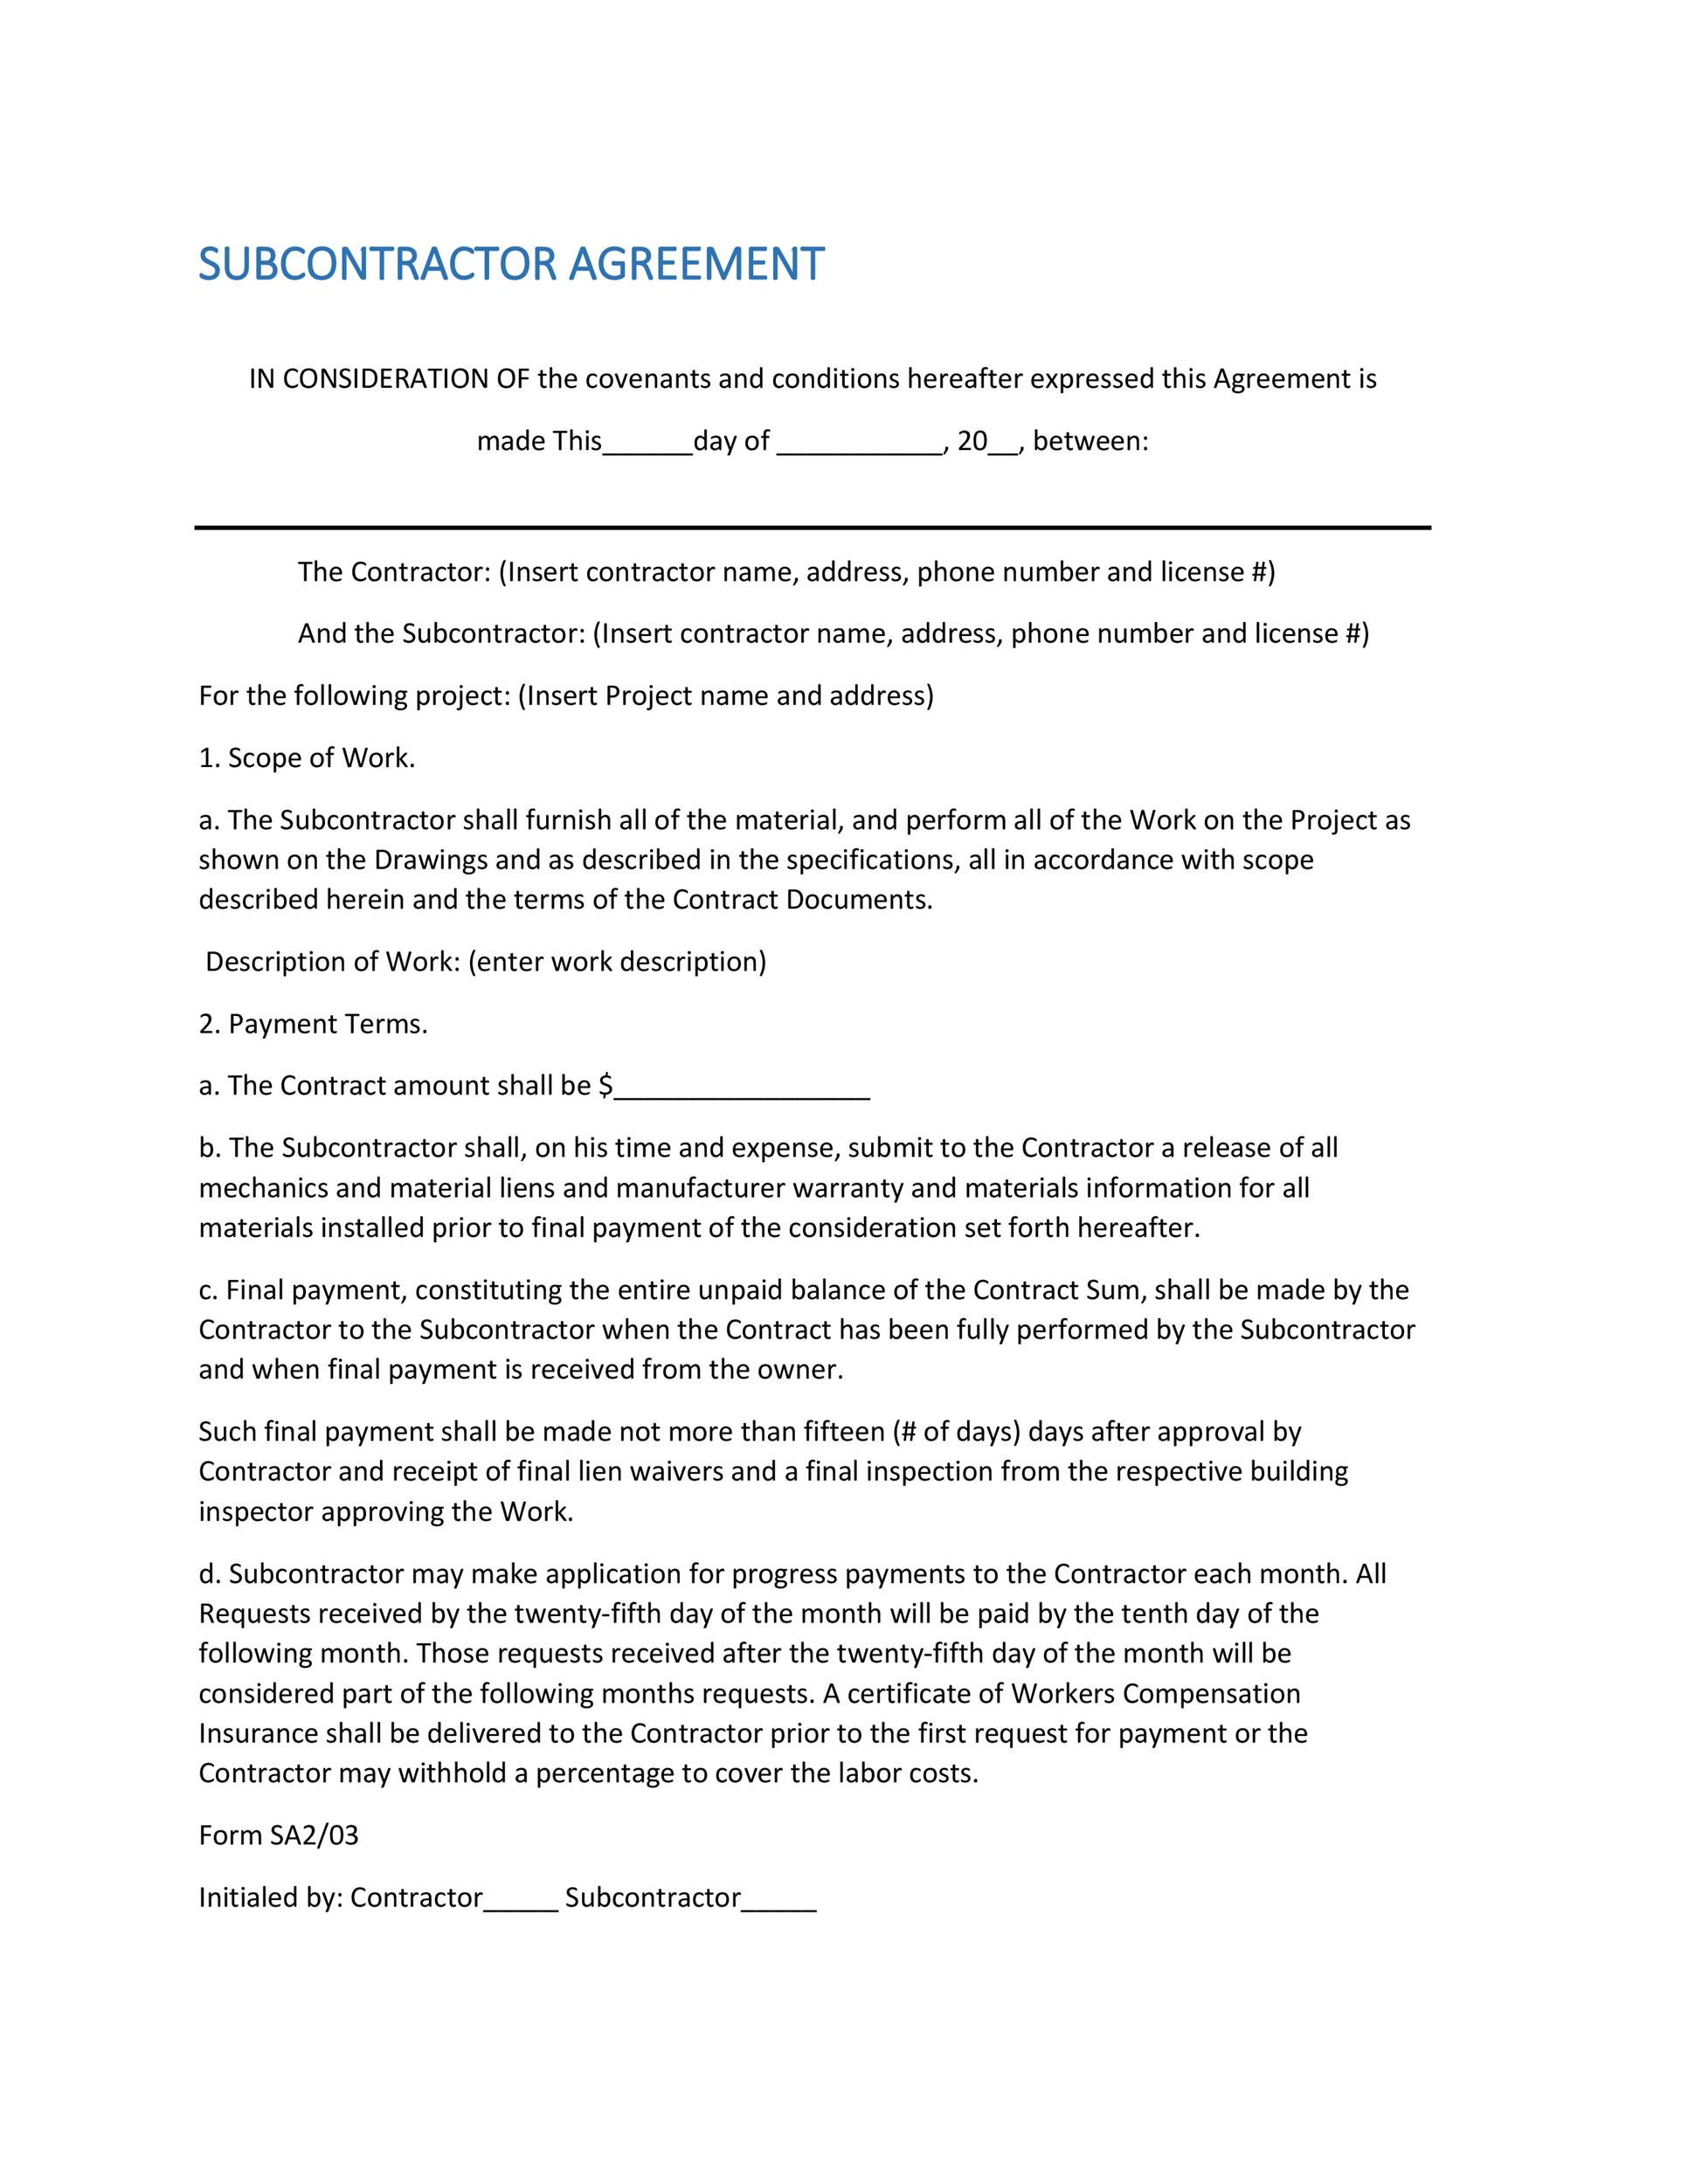 Free Subcontractor Agreement 12